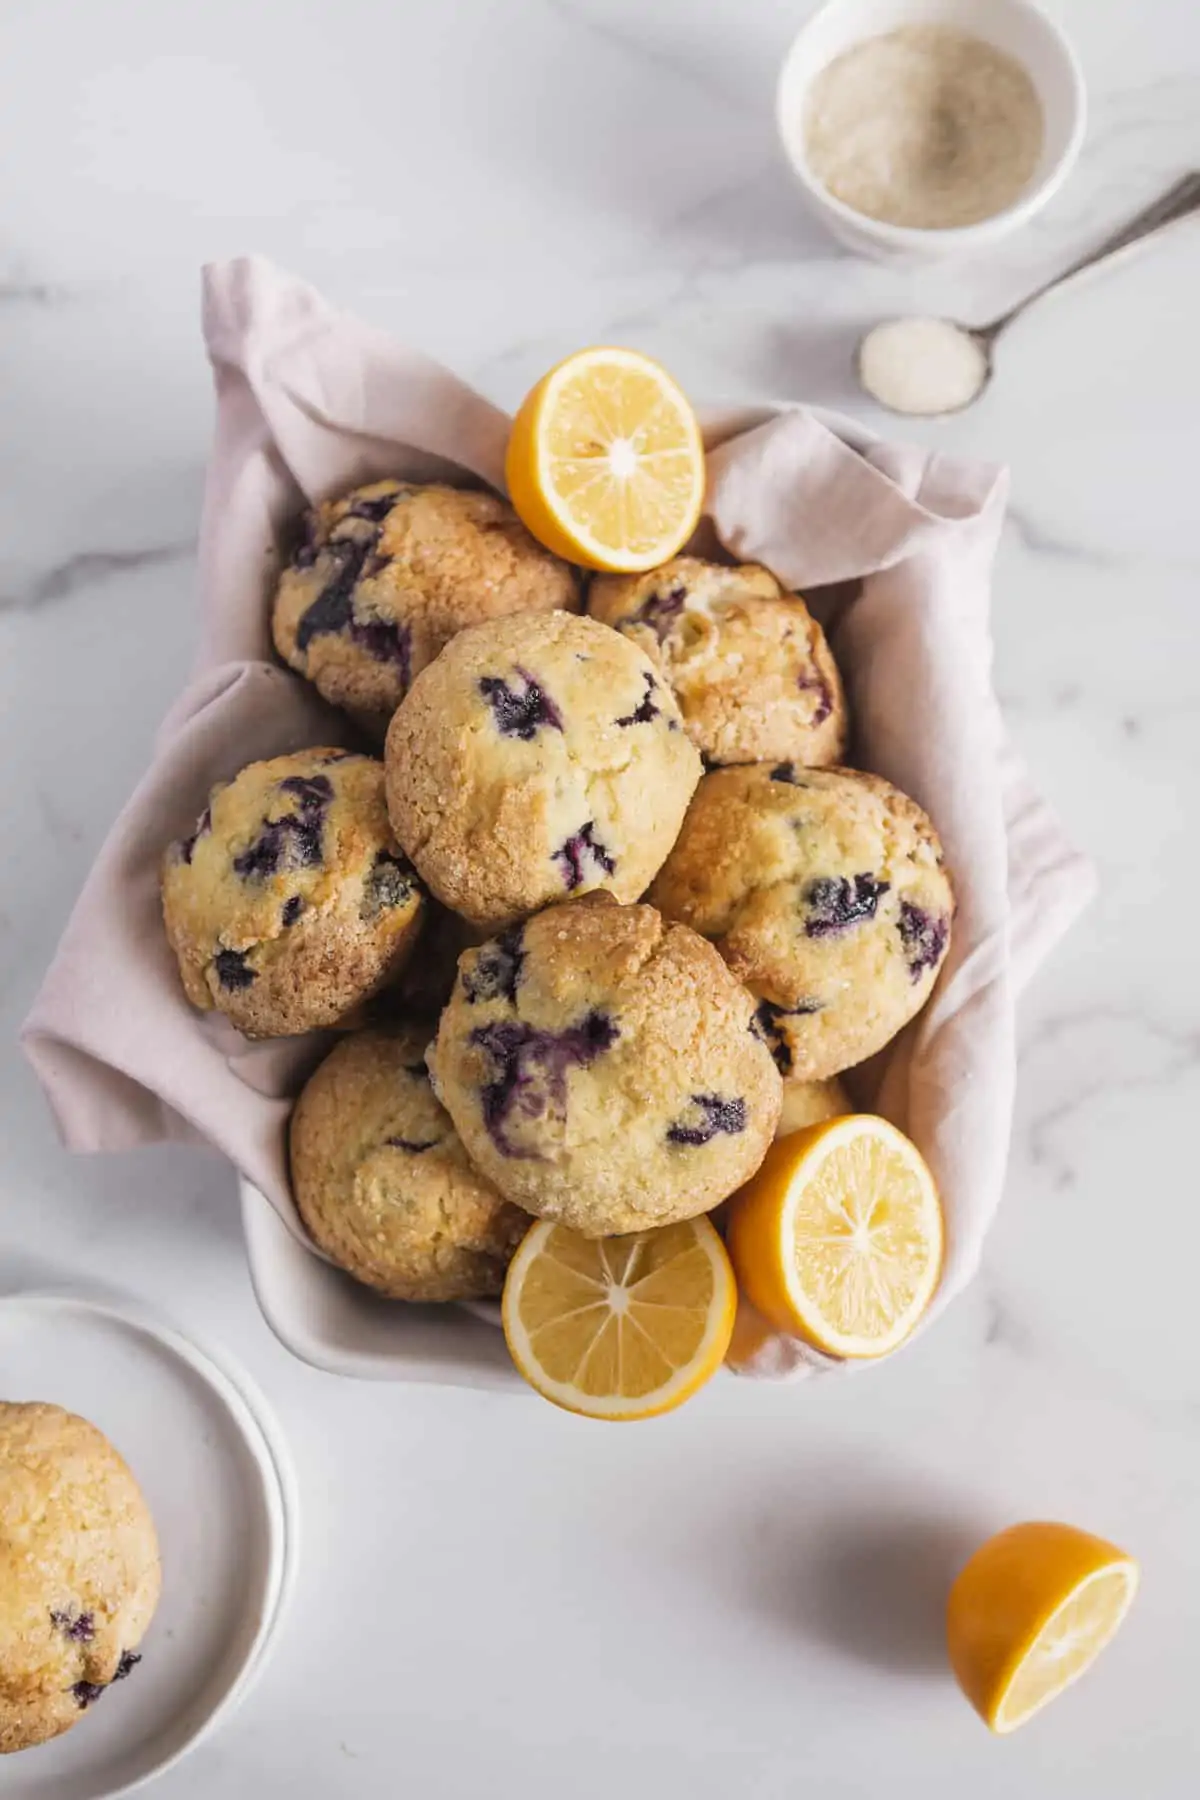 muffins piled into a basket with sugar bowl and lemon to the side